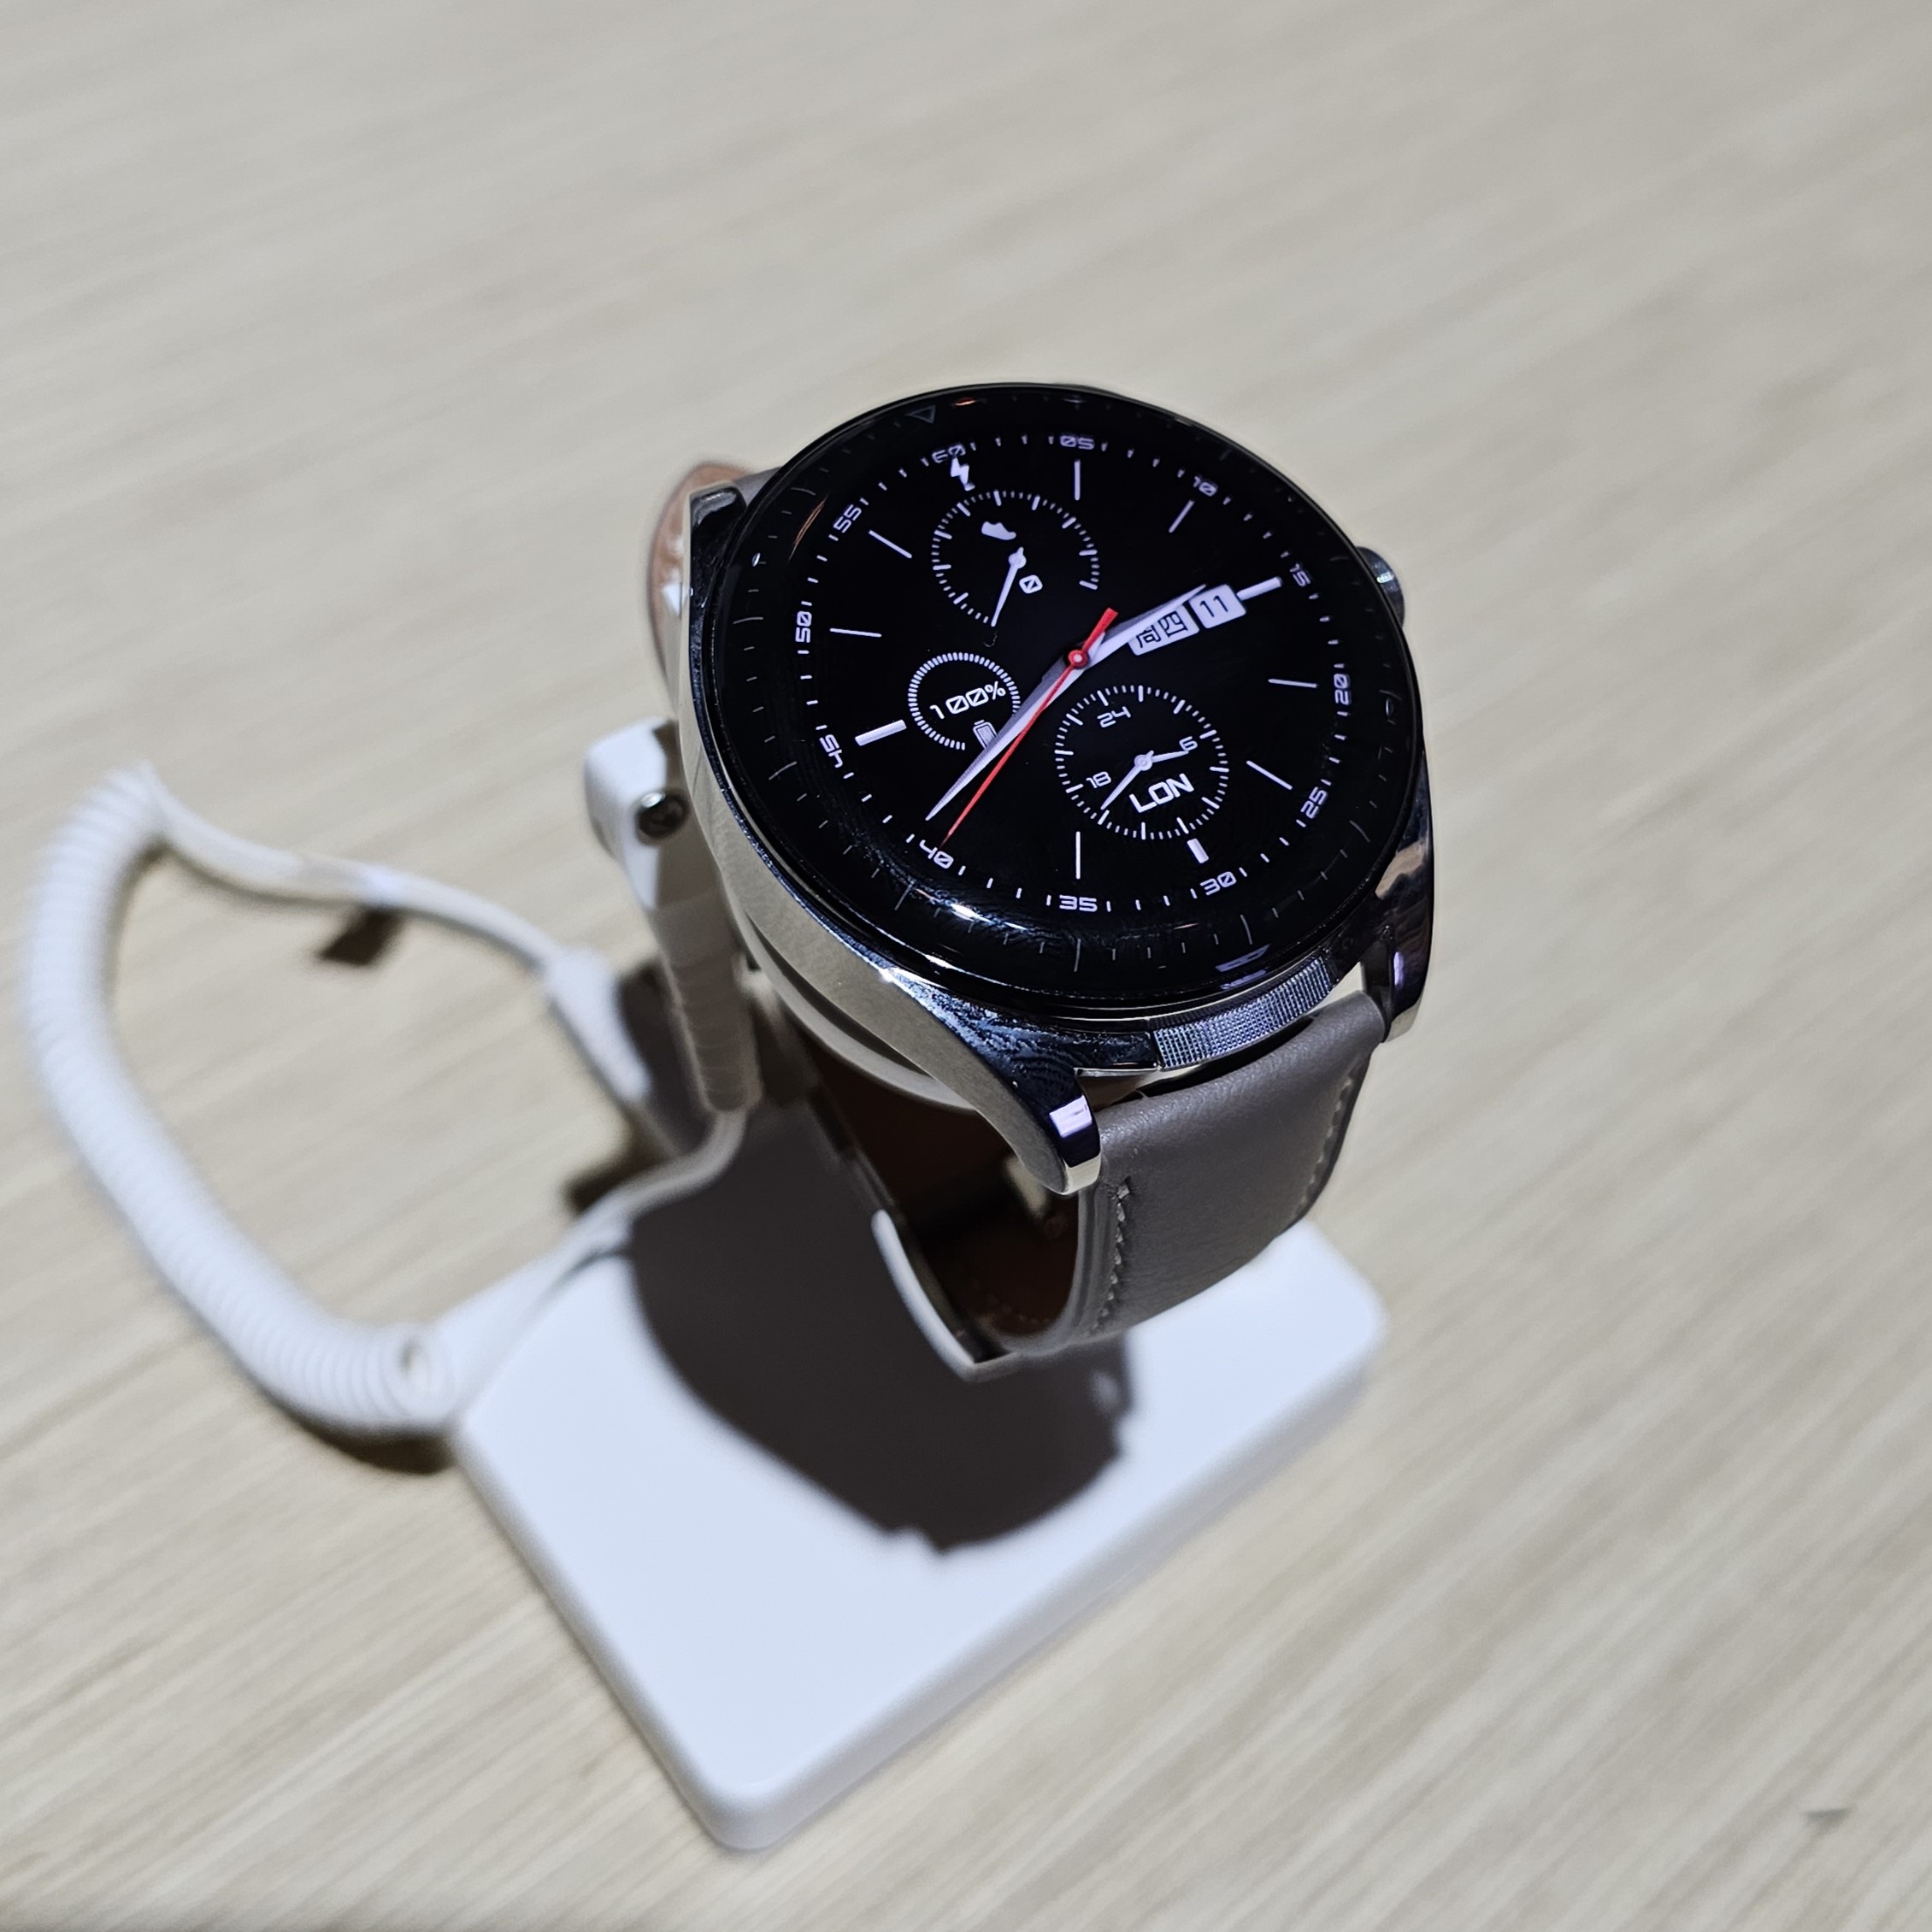 HUAWEI Watch Buds Smartwatch With Built-In TWS Earbuds Launched In Malaysia Alongside Other Wearables 9